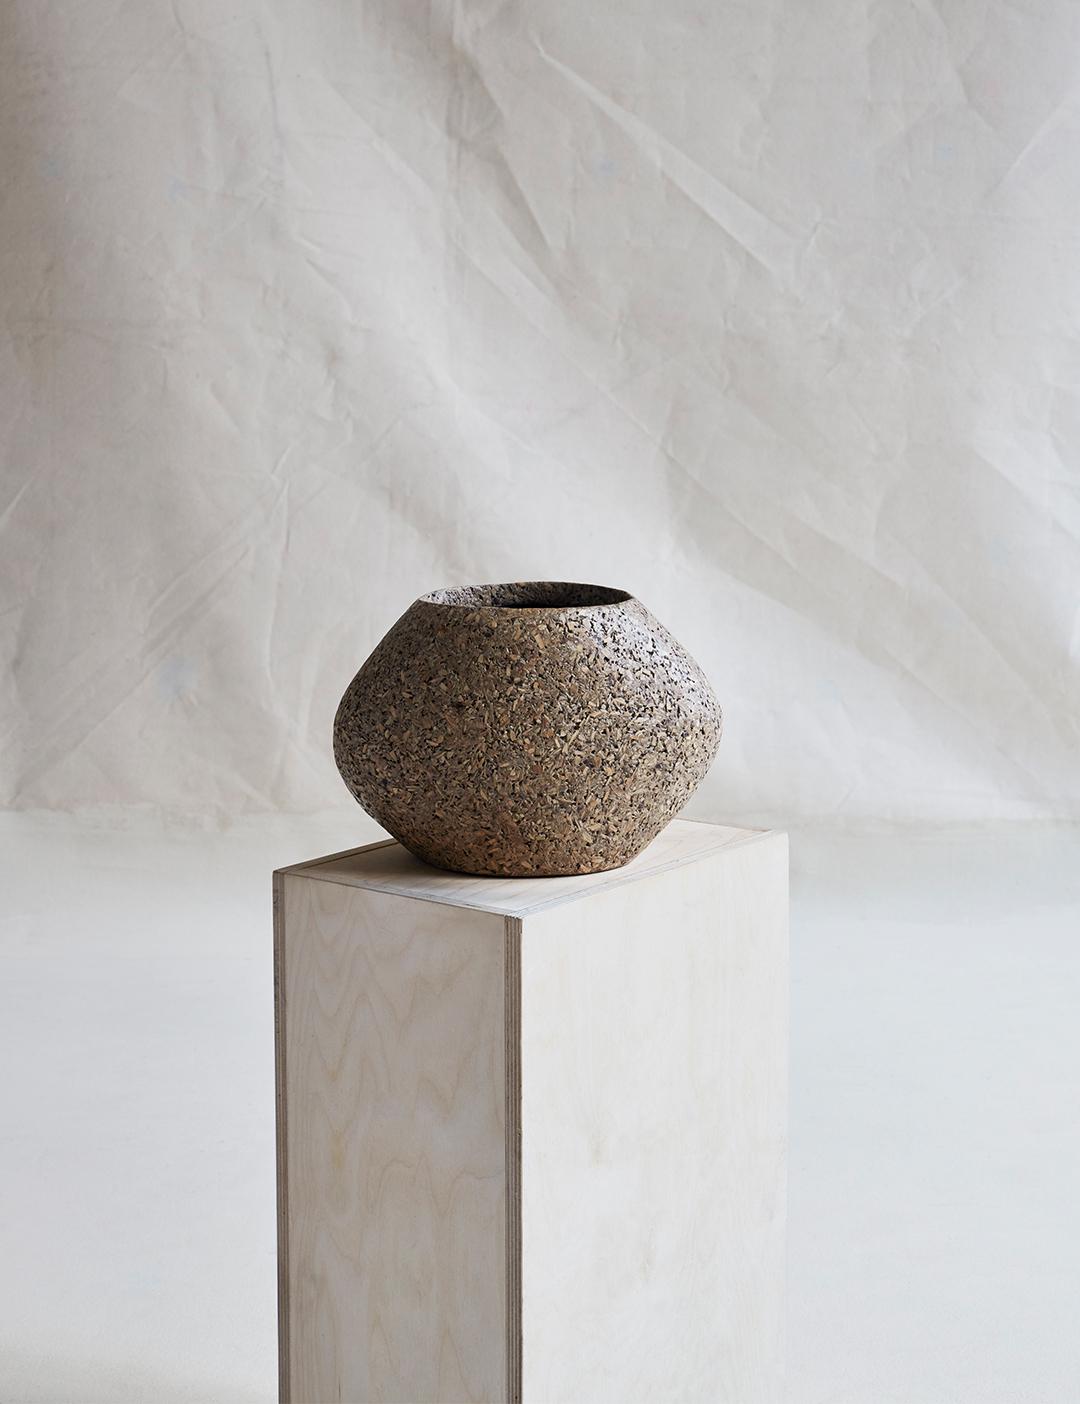 An small, wide-mouthed, bulbous vessel with an organic texture and structured finish. 

For indoor or outdoor use, in covered environments.

Dimensions (in): 10